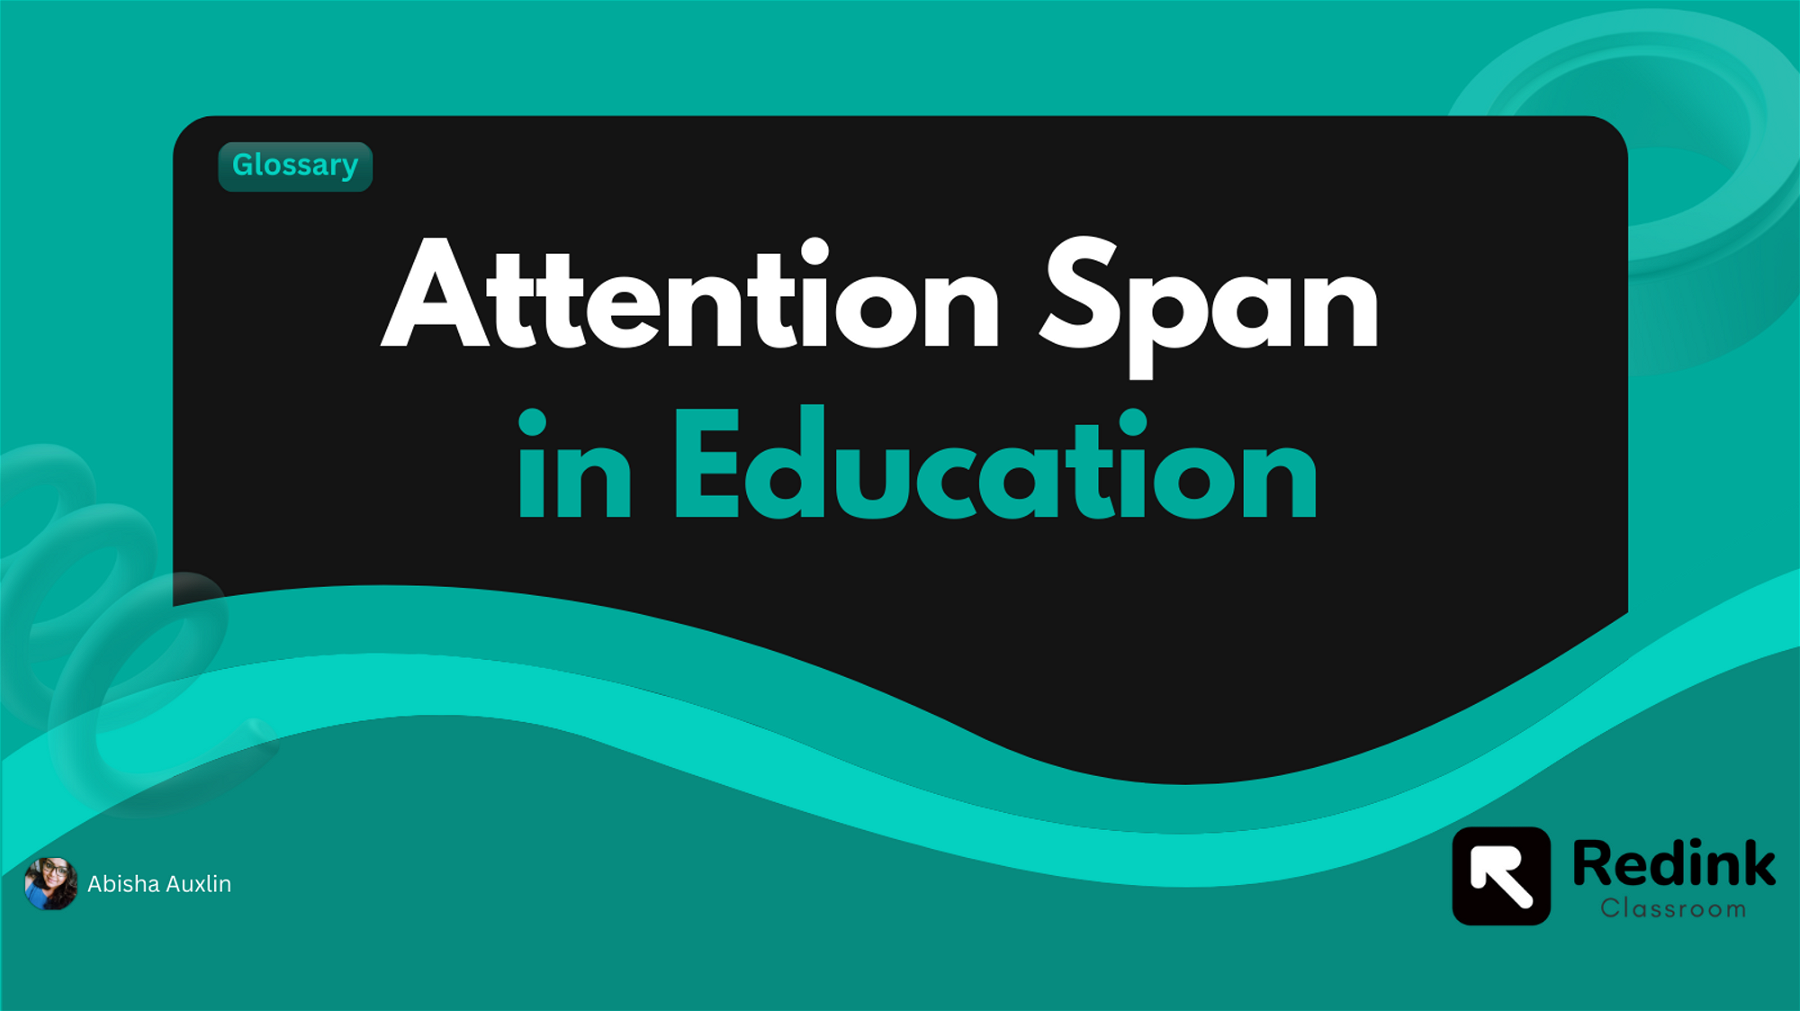 What is Attention Span in Education?